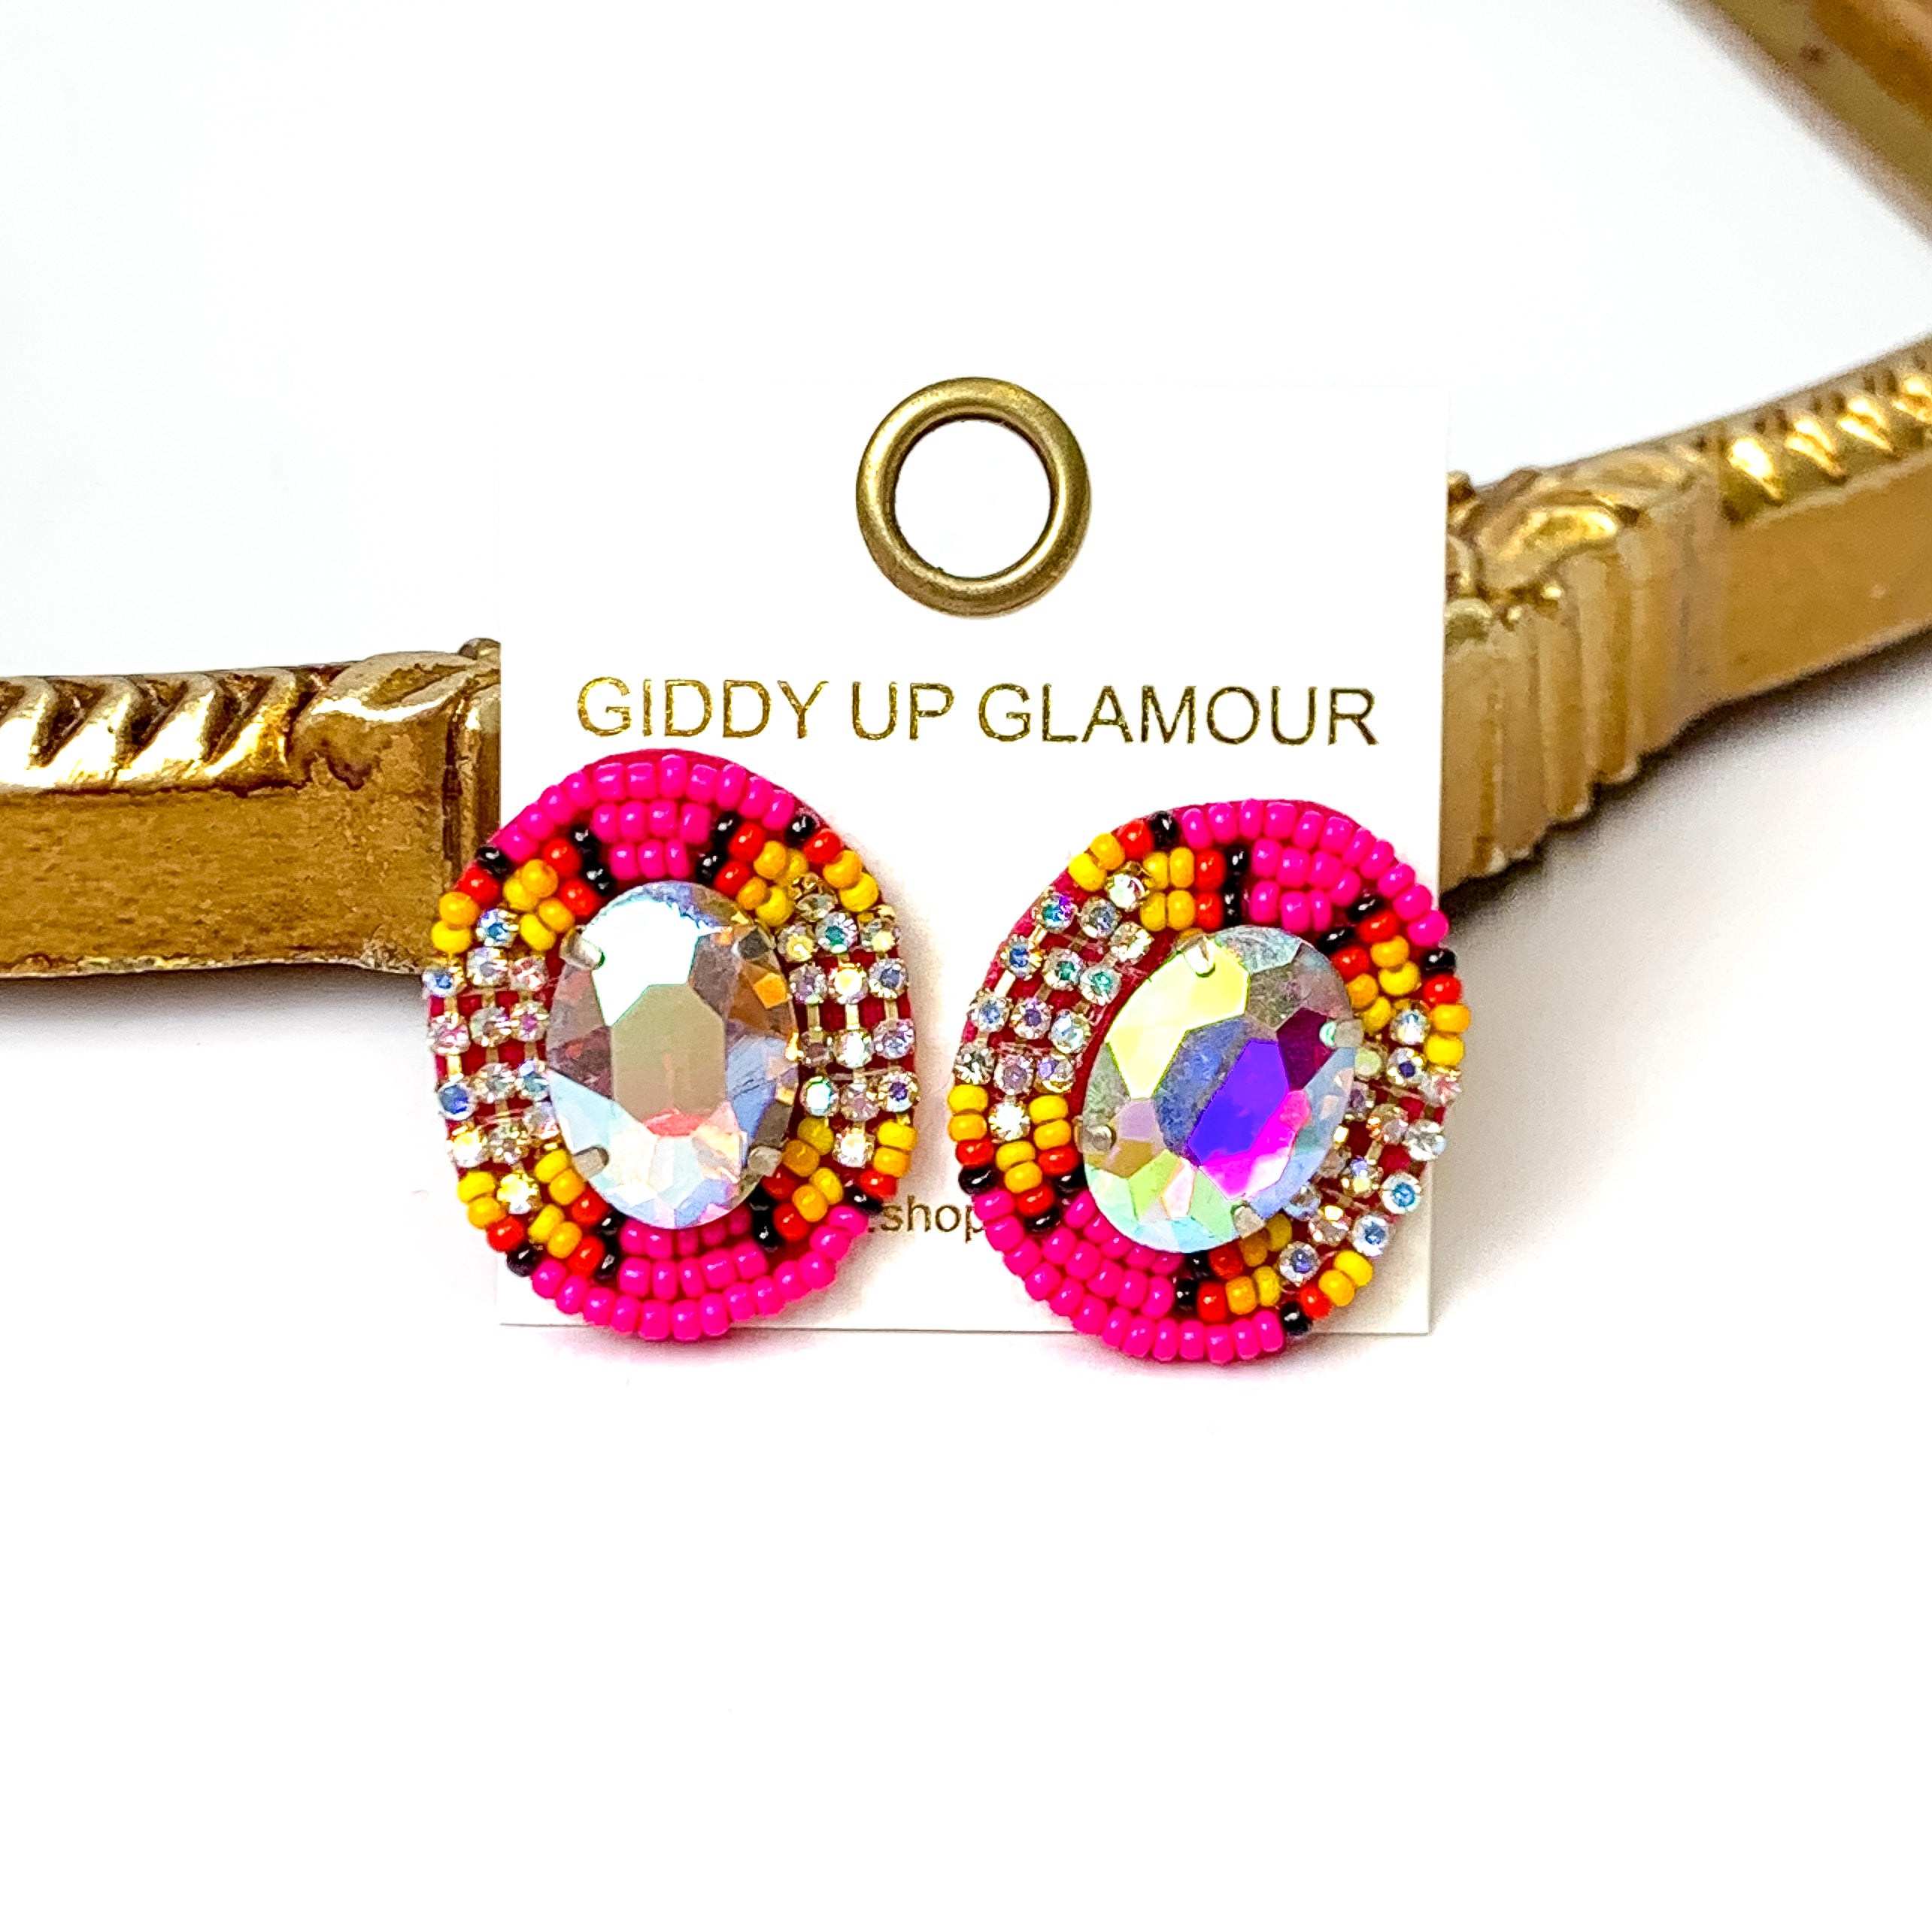 Sunset Serenade Oval Studs in Fuchsia Pink - Giddy Up Glamour Boutique